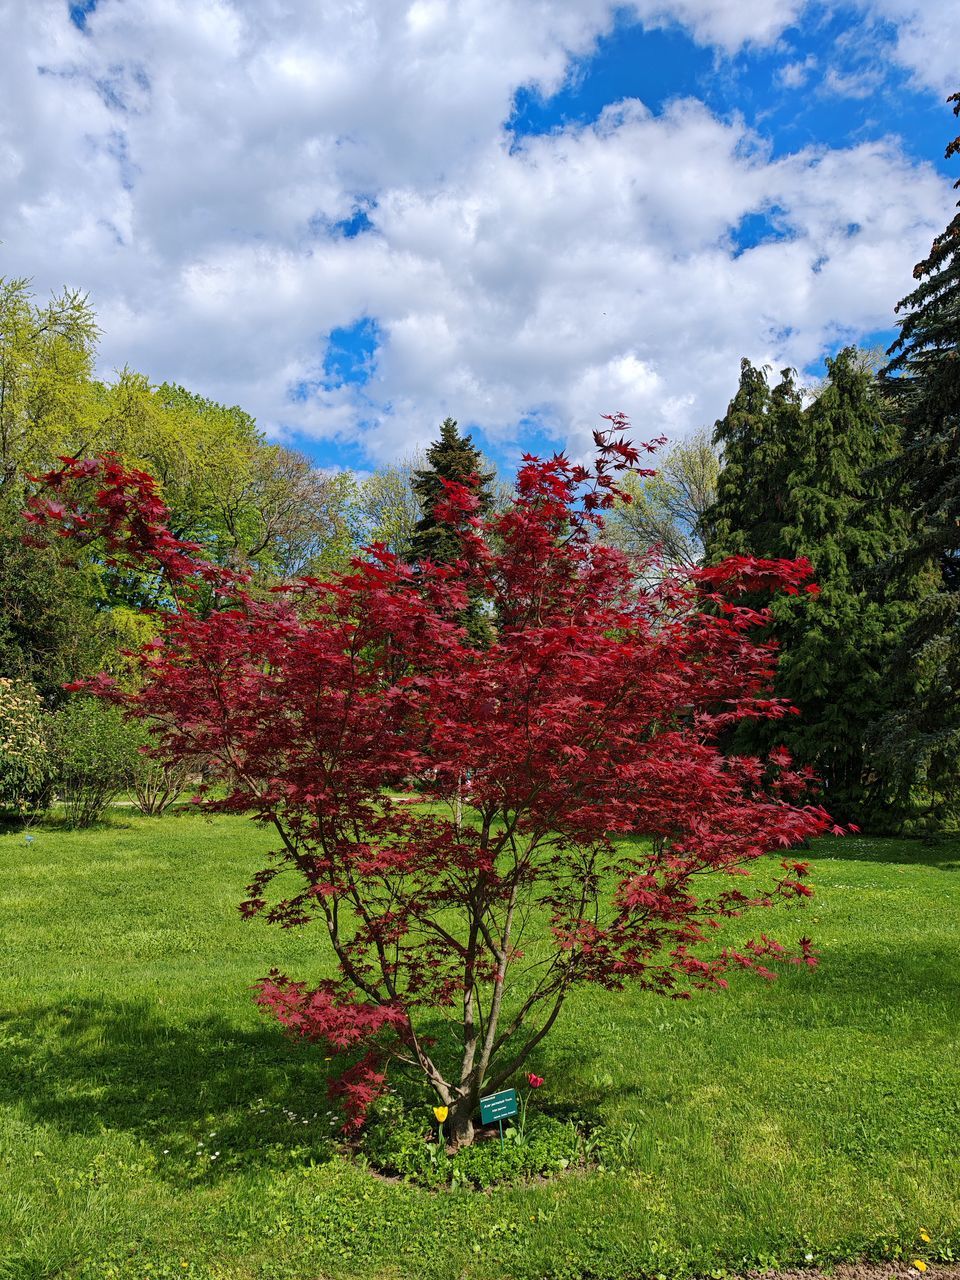 plant, tree, cloud, flower, nature, sky, beauty in nature, leaf, grass, meadow, autumn, growth, flowering plant, green, landscape, no people, environment, garden, scenics - nature, red, day, tranquility, land, blossom, shrub, outdoors, field, tranquil scene, freshness, multi colored, springtime, non-urban scene, park